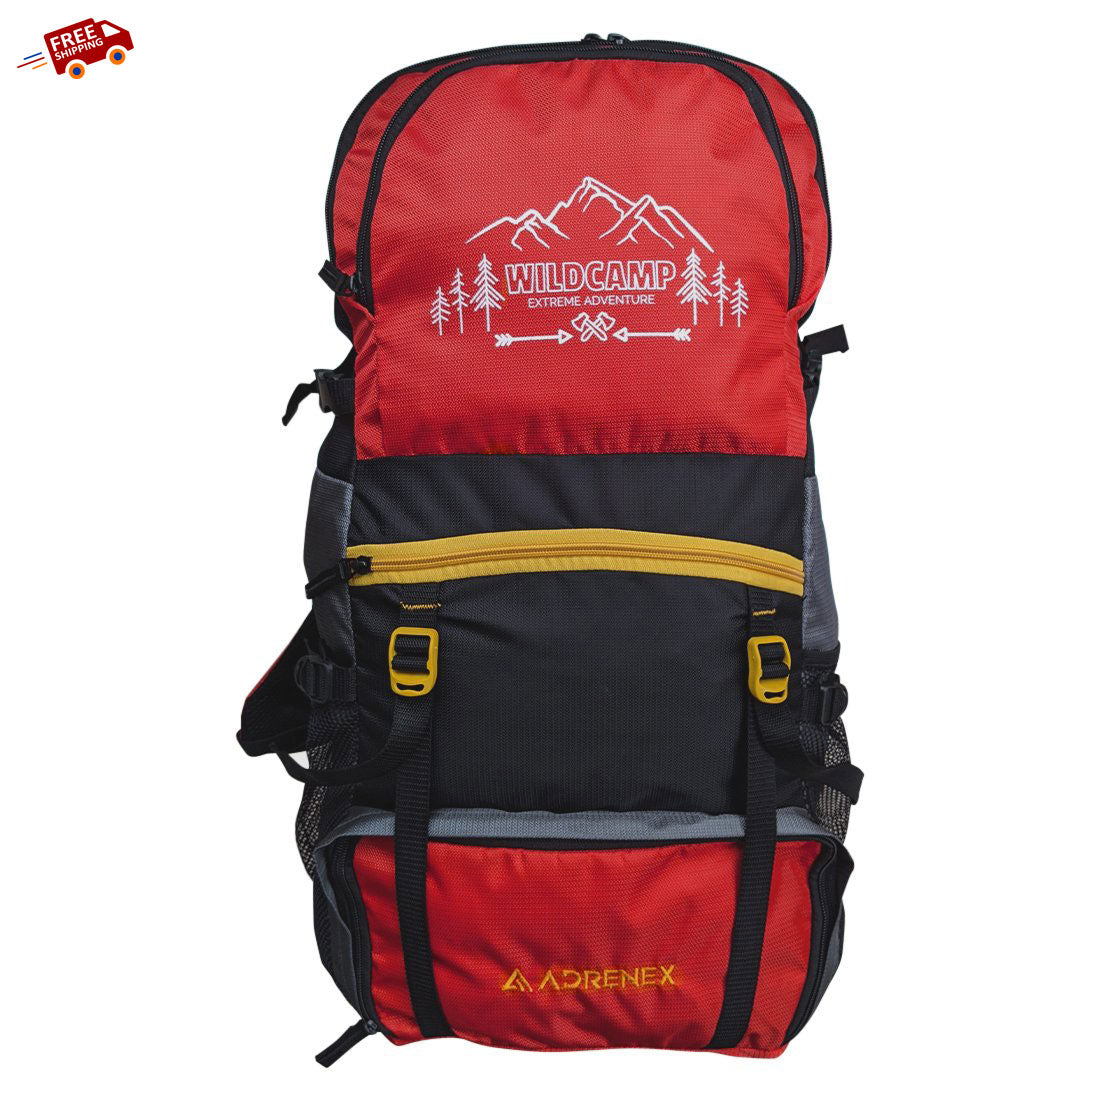 Wildcamp Travel Backpack - 55 Litre - Red